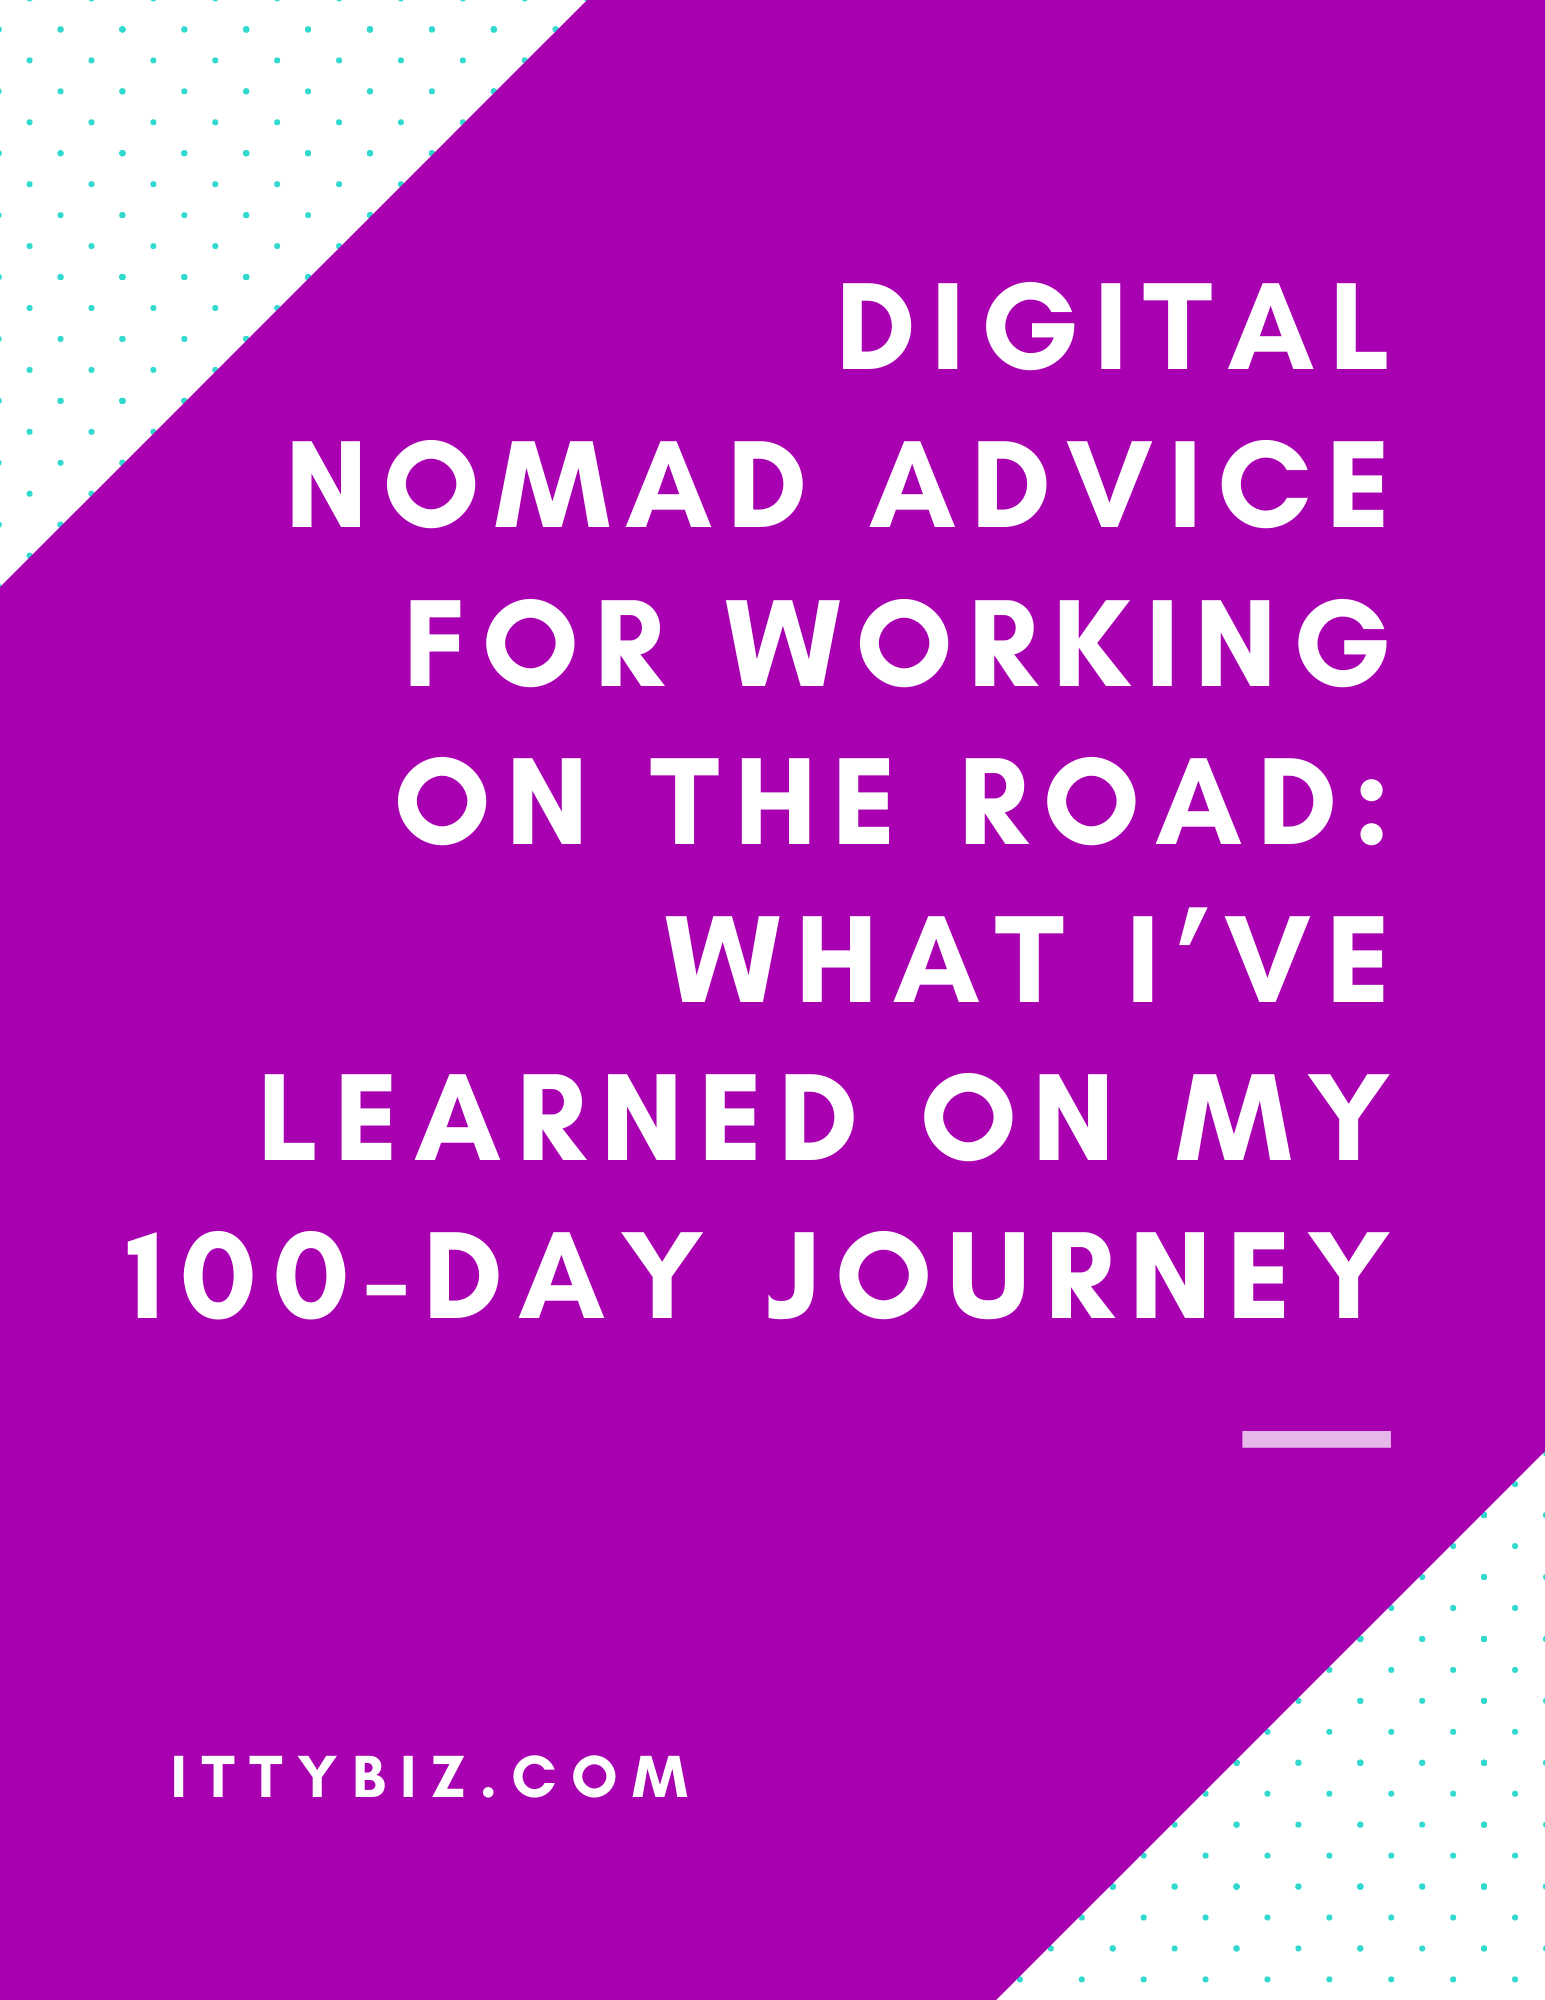 Digital Nomad Advice For Working On The Road: What I’ve Learned On My 100-Day Journey